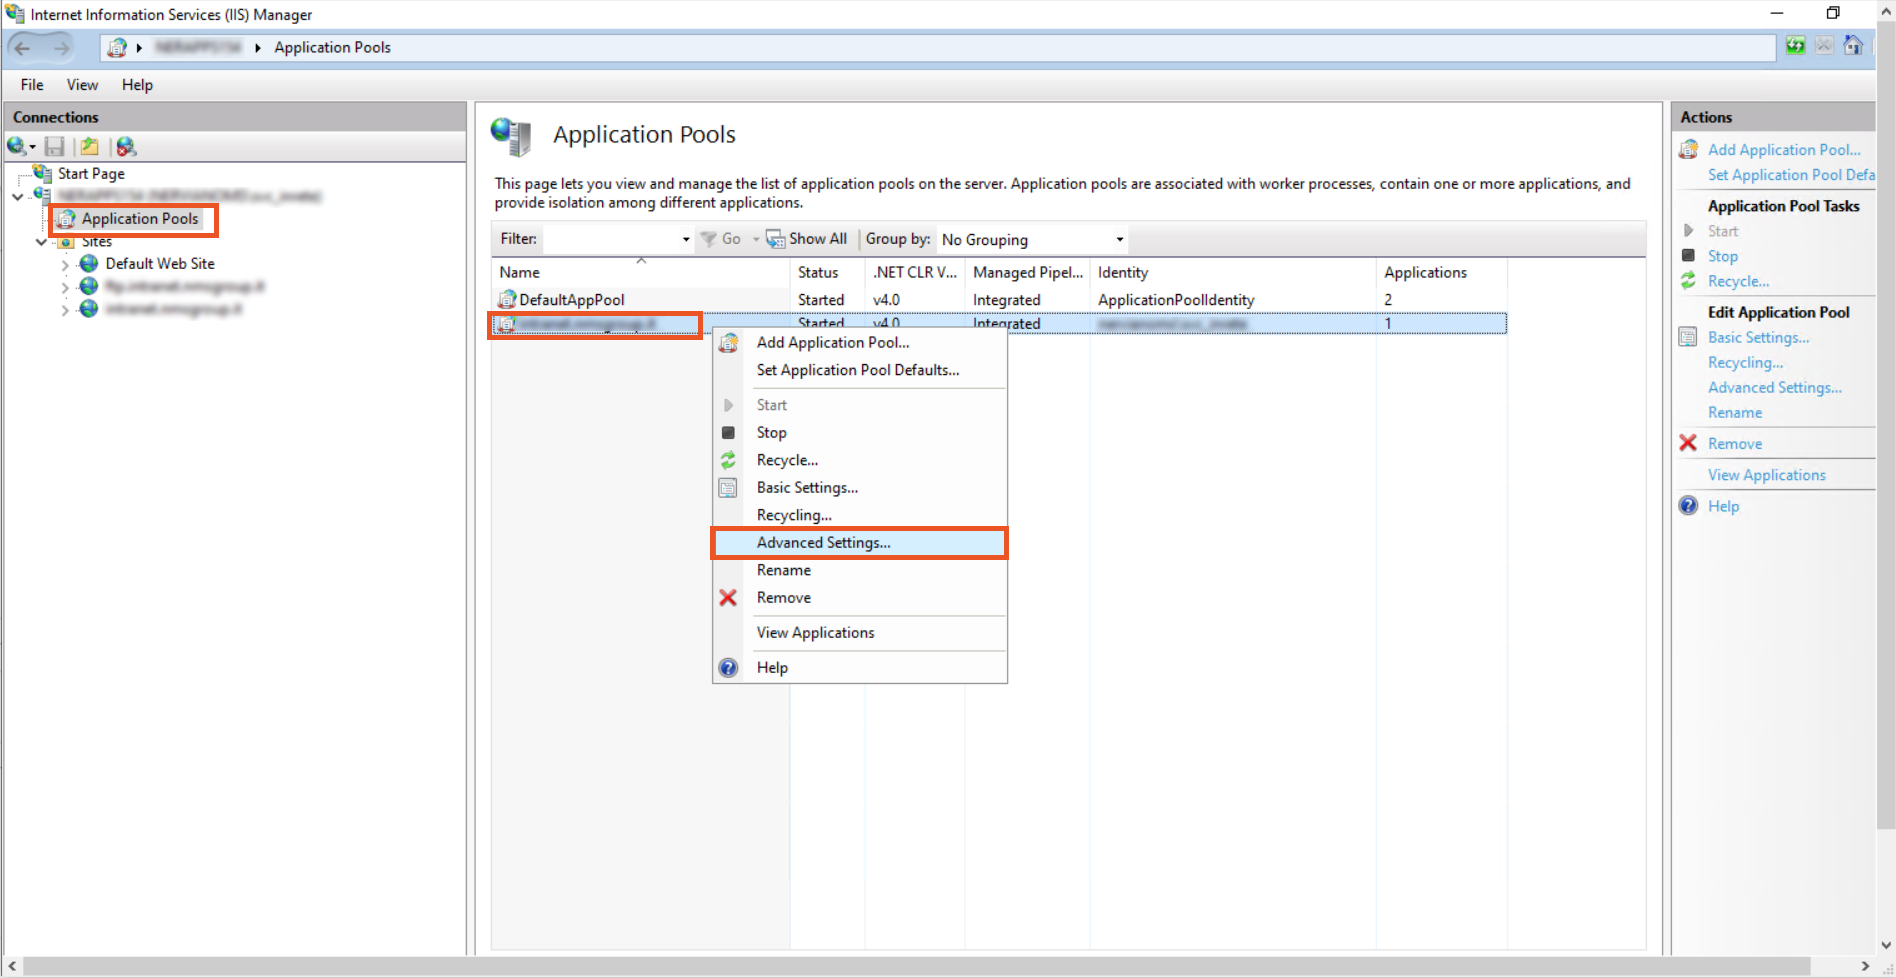 Windows Internet Information Service (IIS) manager application pool site advanced settings to enable Kerberos SSO